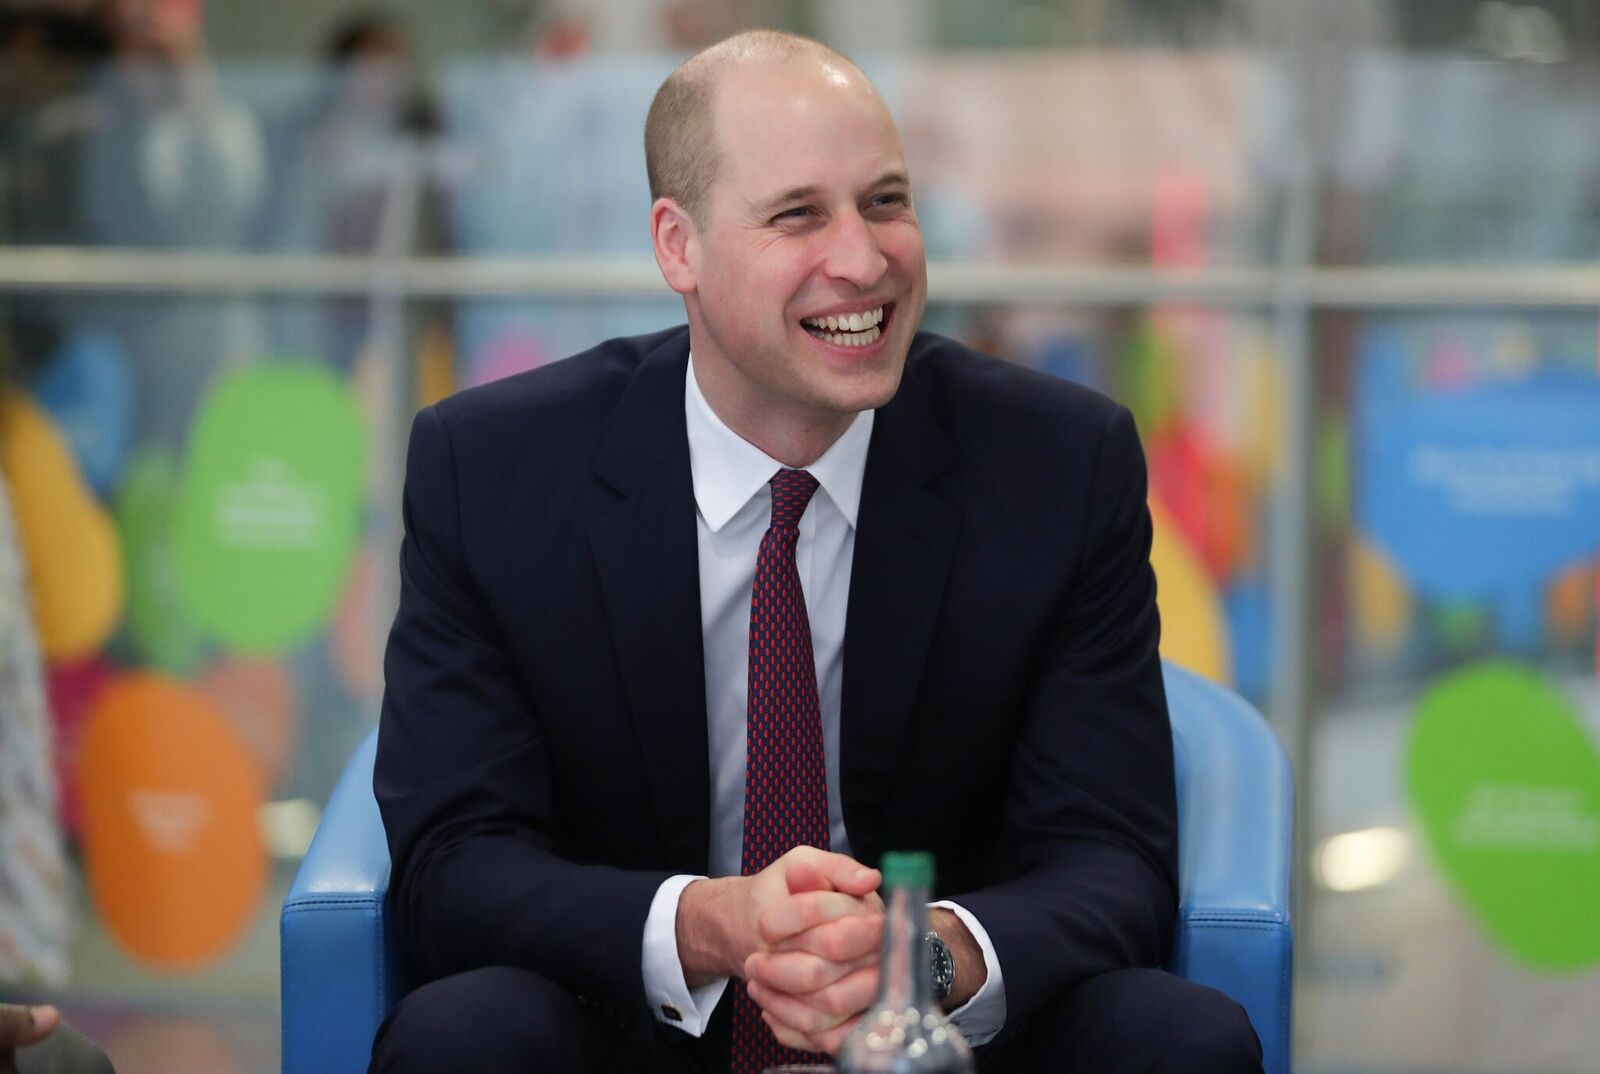 Prince William speaks with military veterans now working for the NHS while visiting Evelina London Children's Hospital on January 18, 2018, in England | Photo: Daniel Leal-Olivas - WPA Pool/Getty Images